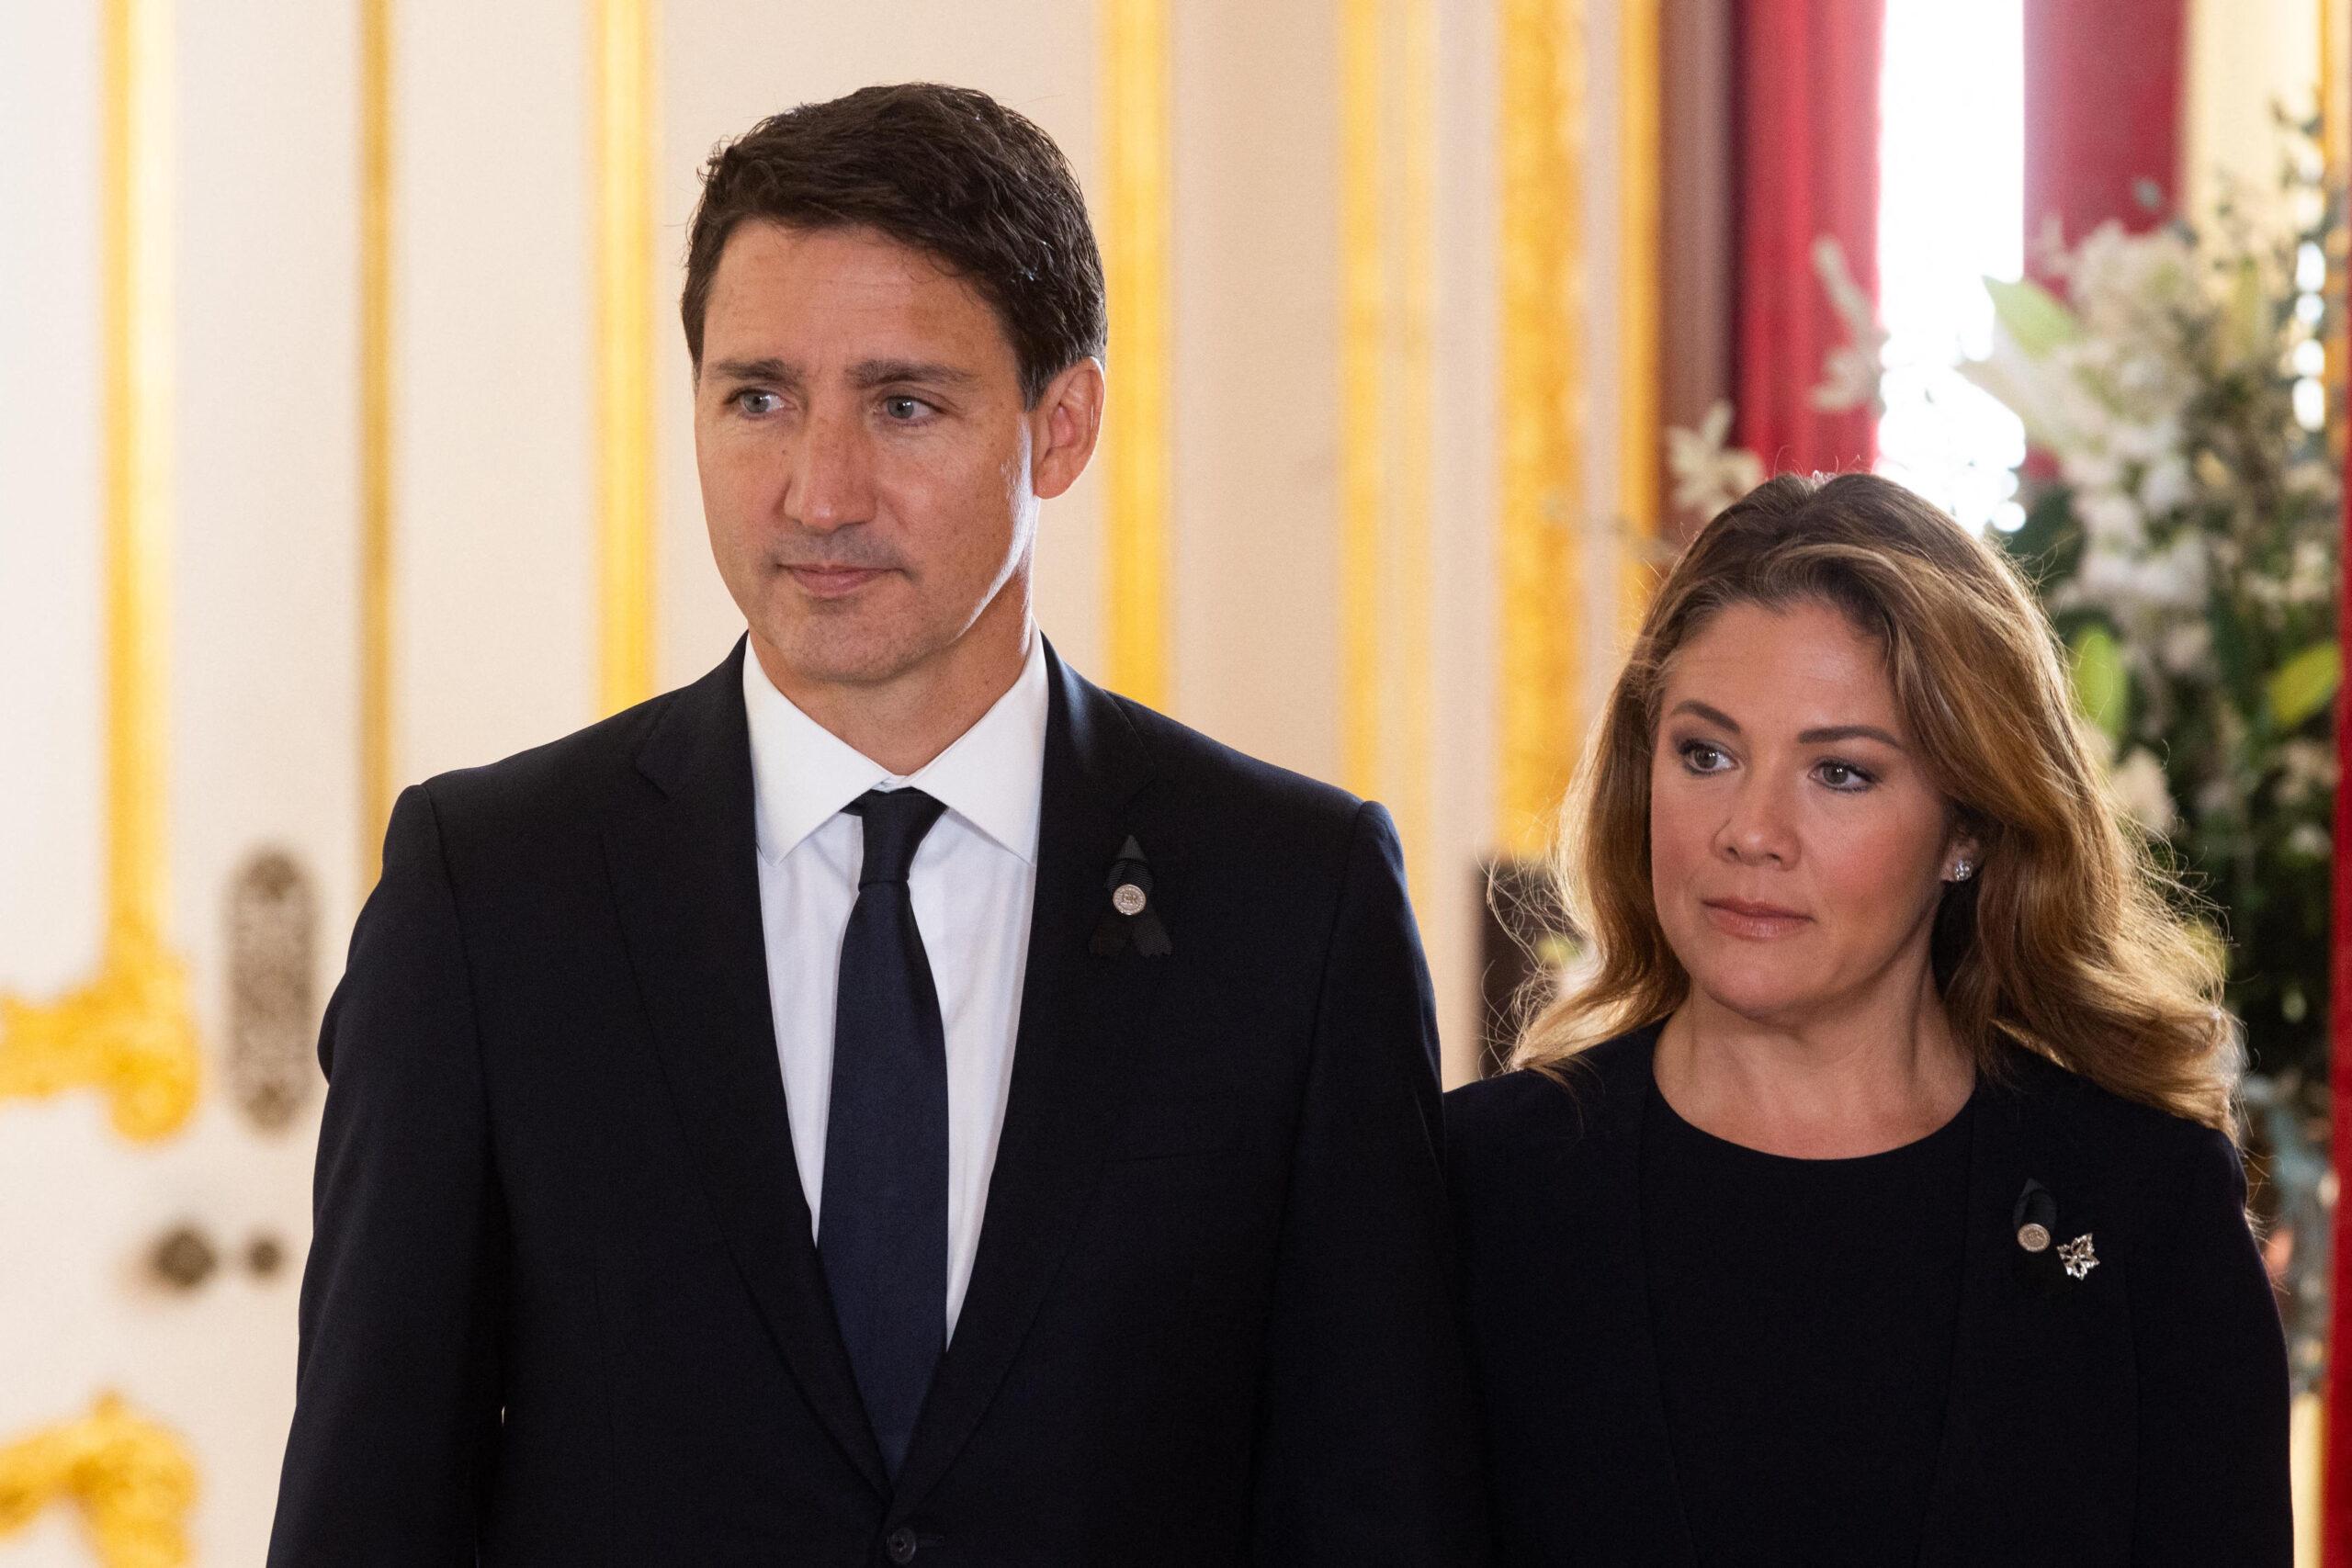 Prime Minister of Canada Justin Trudeau and his wife Sophe Trudeau sign a book of condolence at Lancaster House in London following the death of Queen Elizabeth II